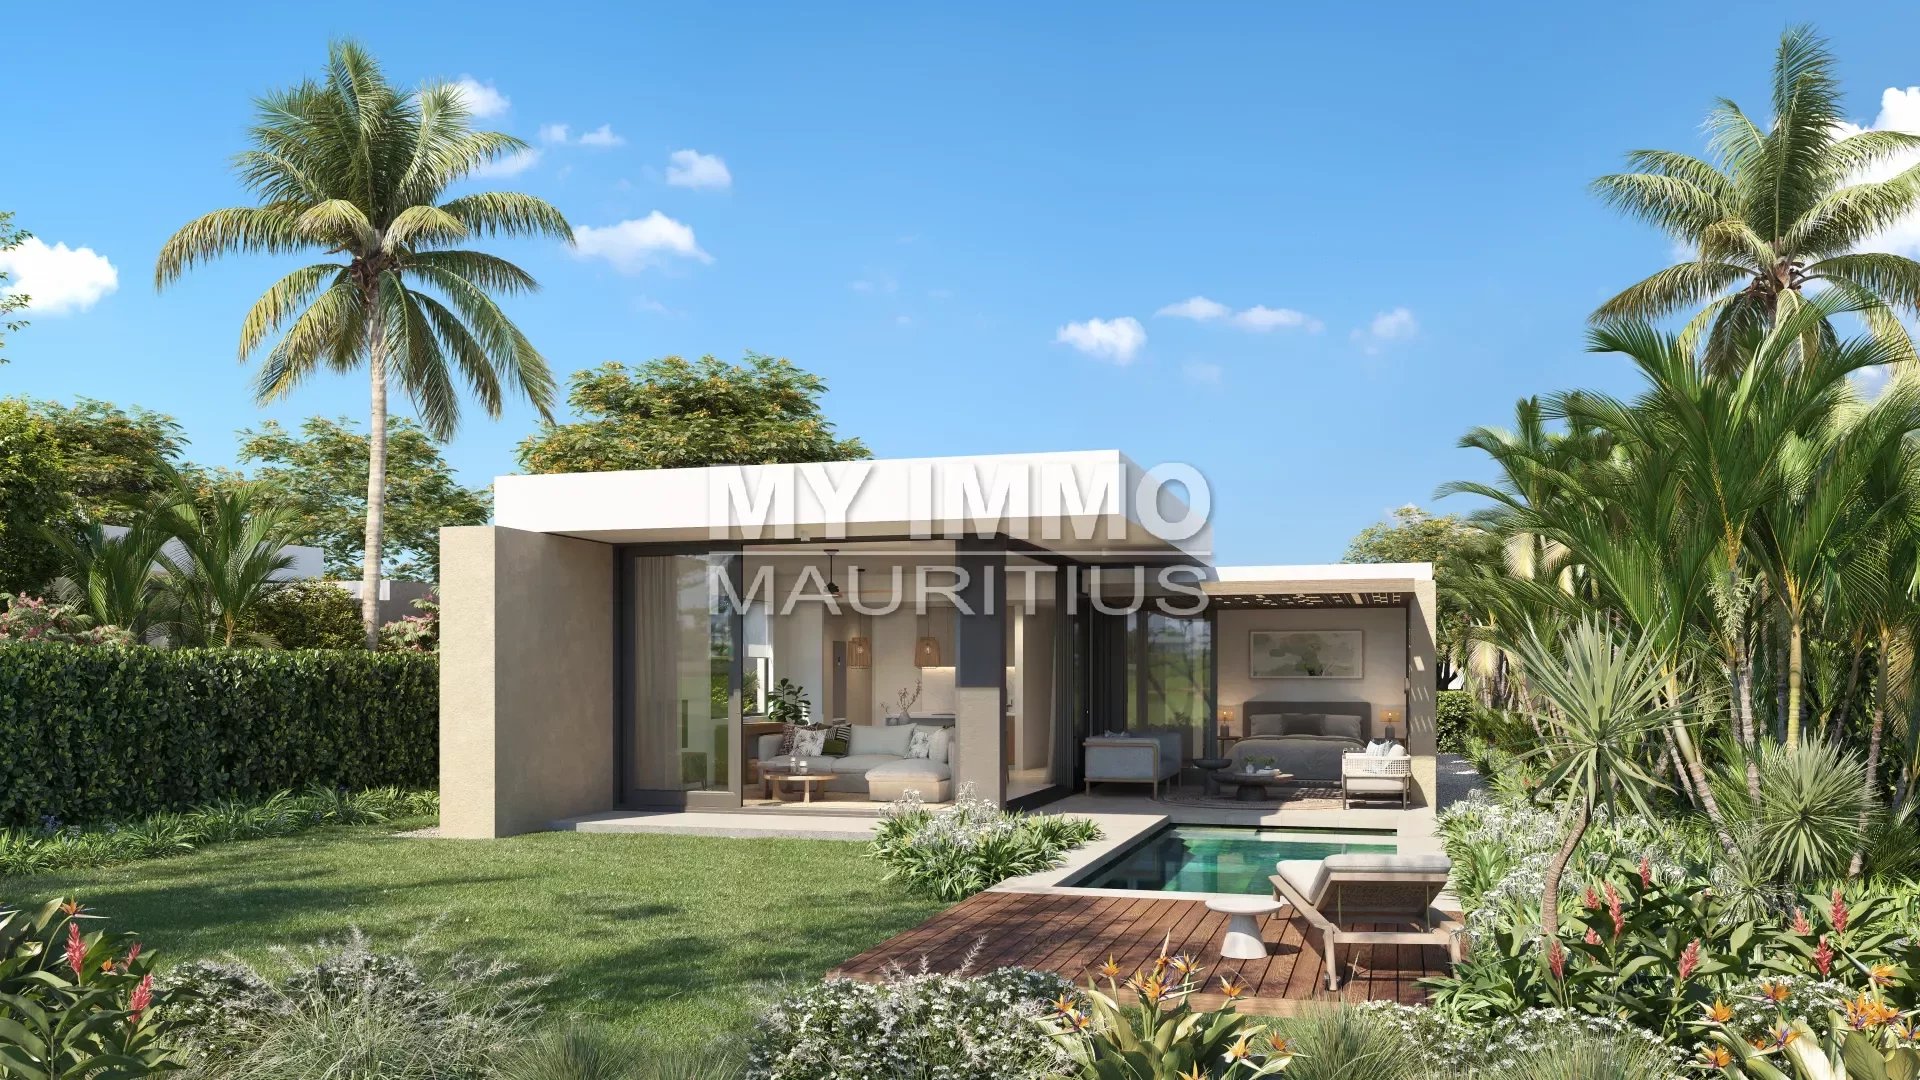 2-bedroom villa in the heart of a golf course